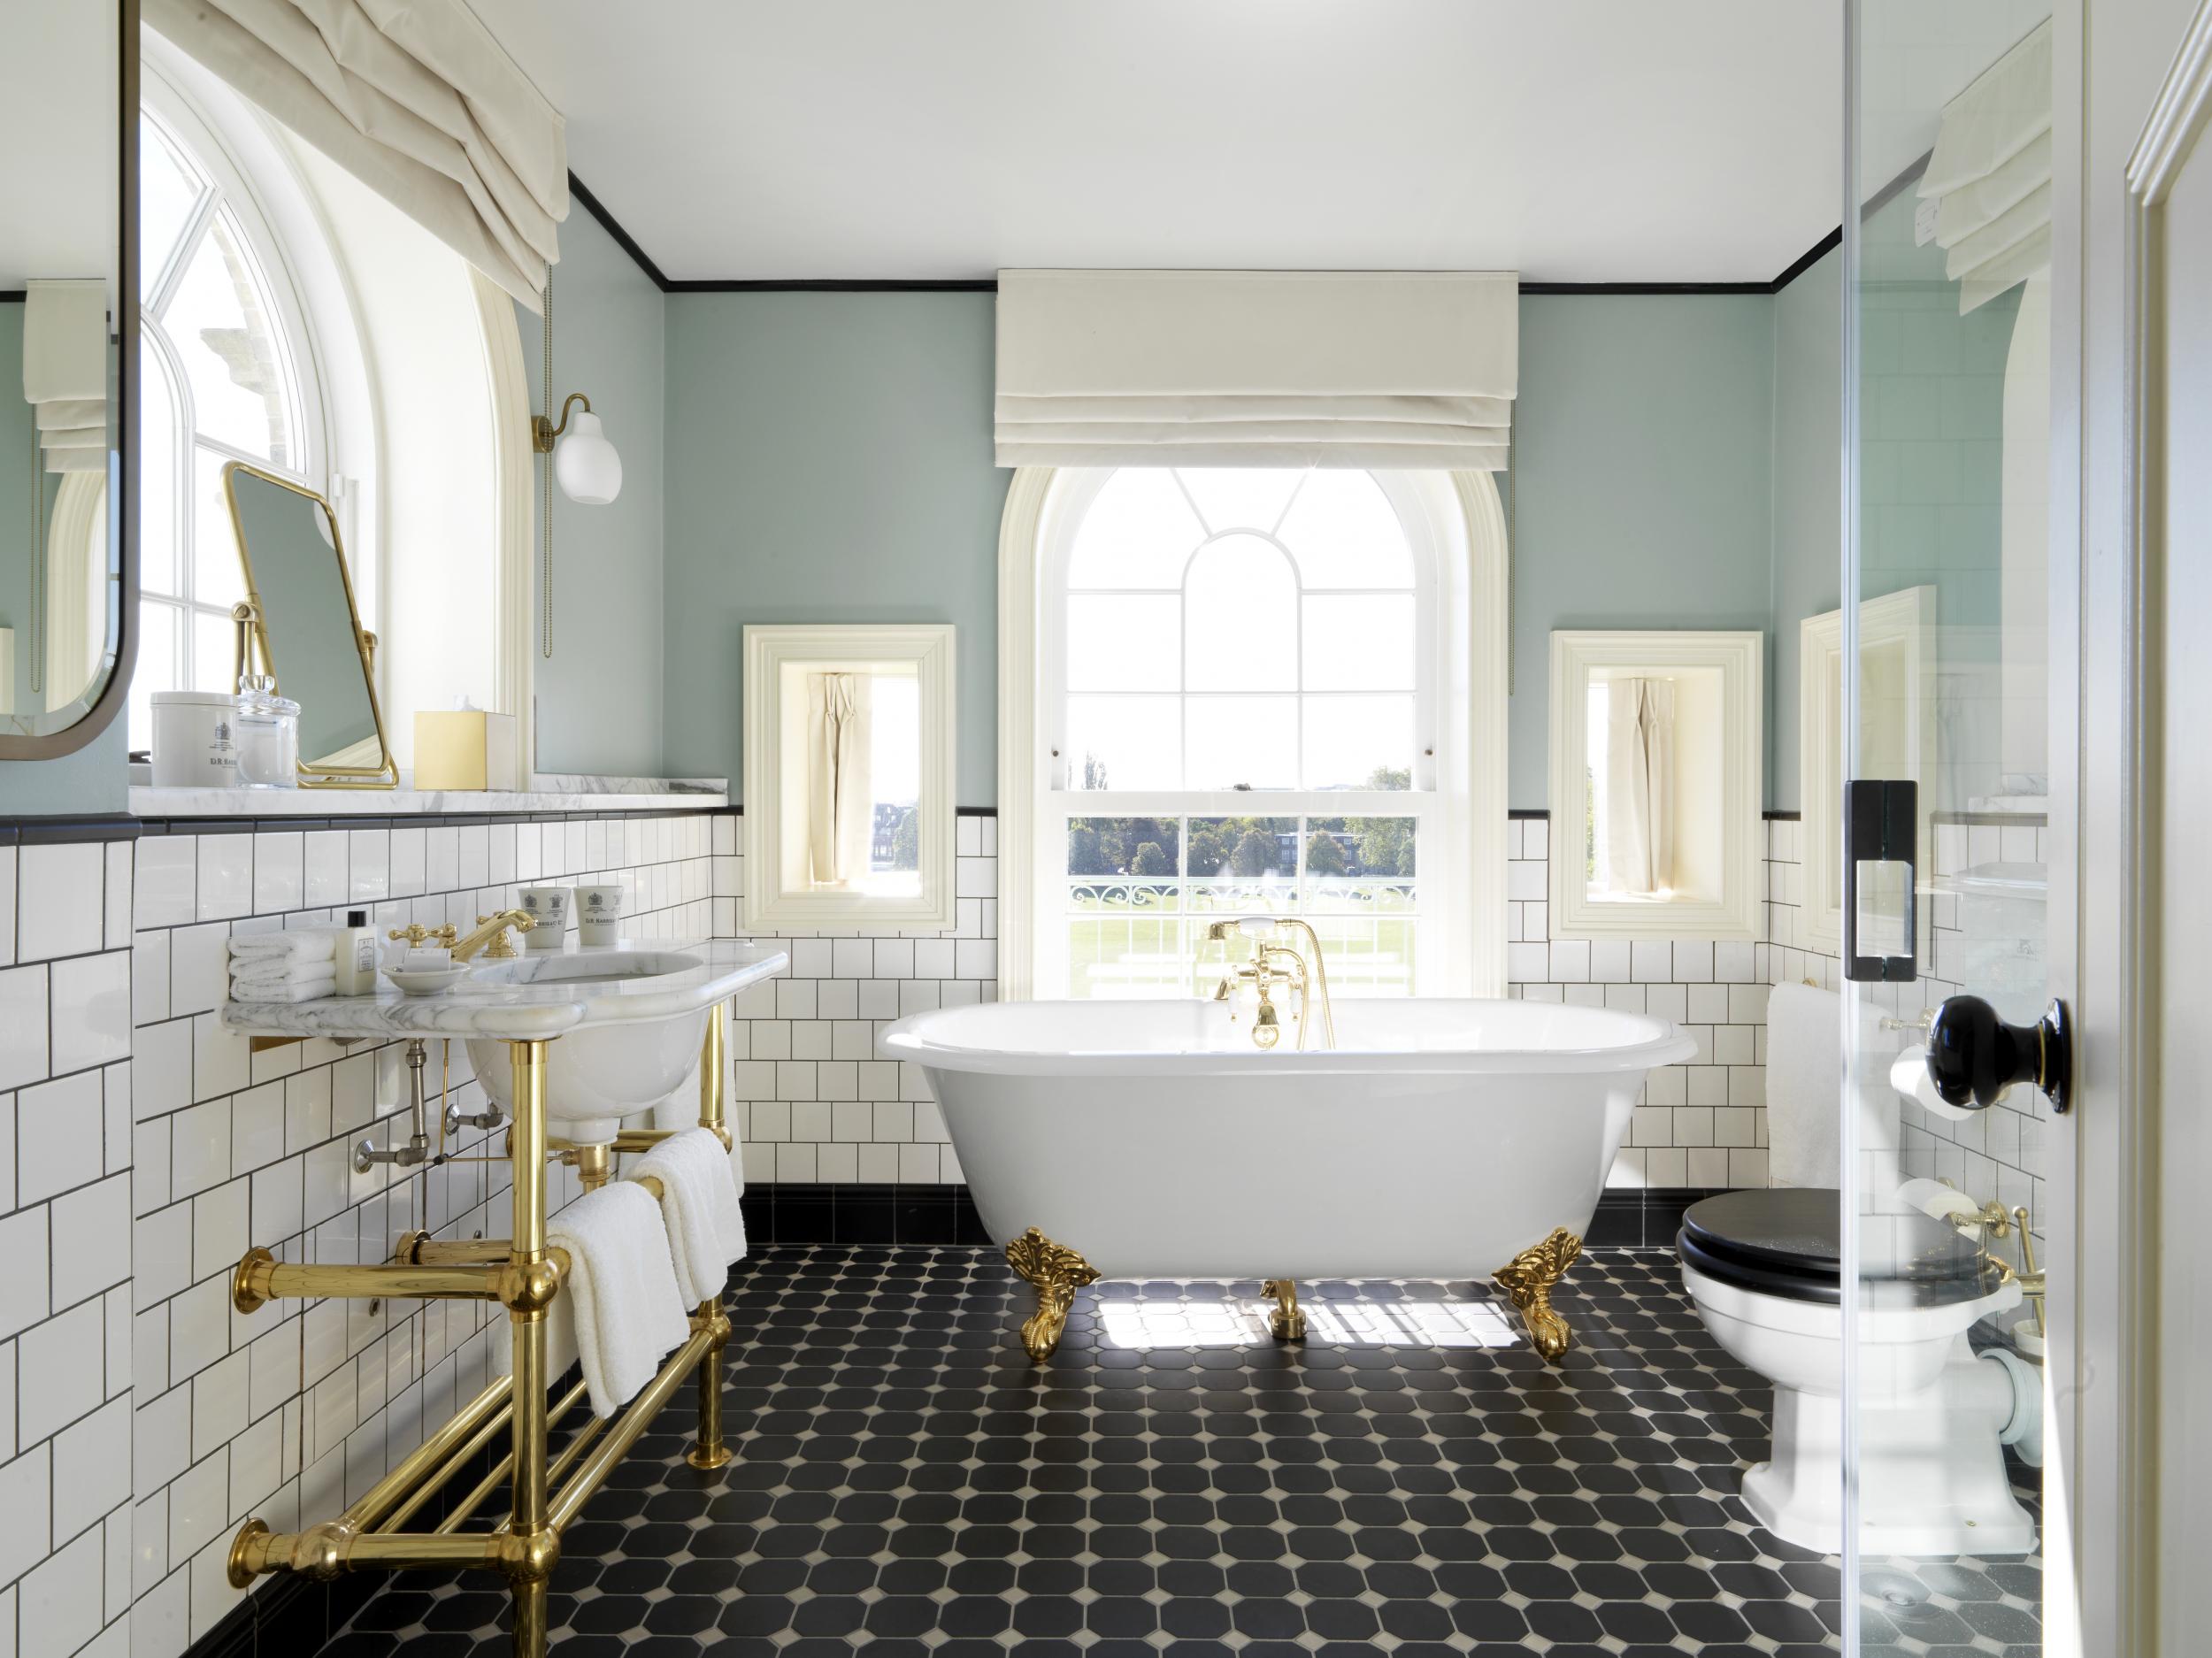 Take a soak in one of the University Arms' opulent rooms